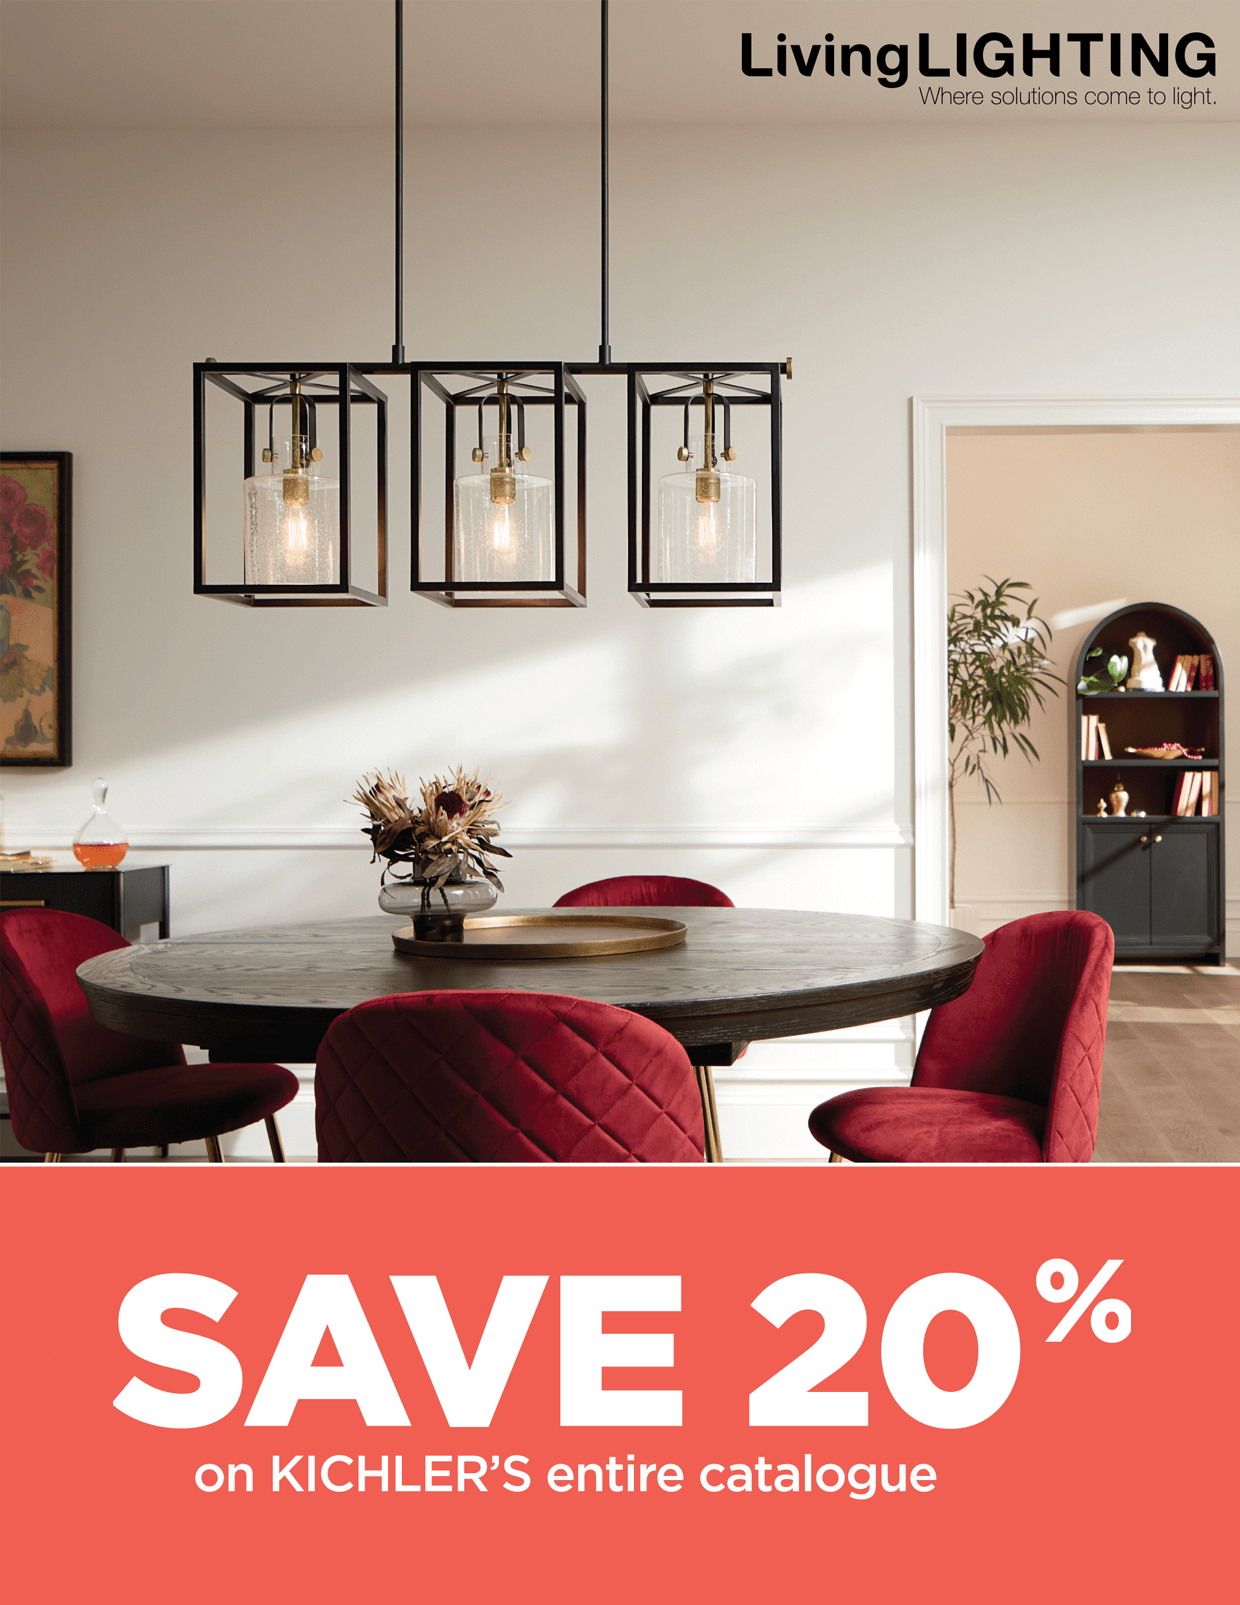 Save 20% on Kichler's entire catalogue